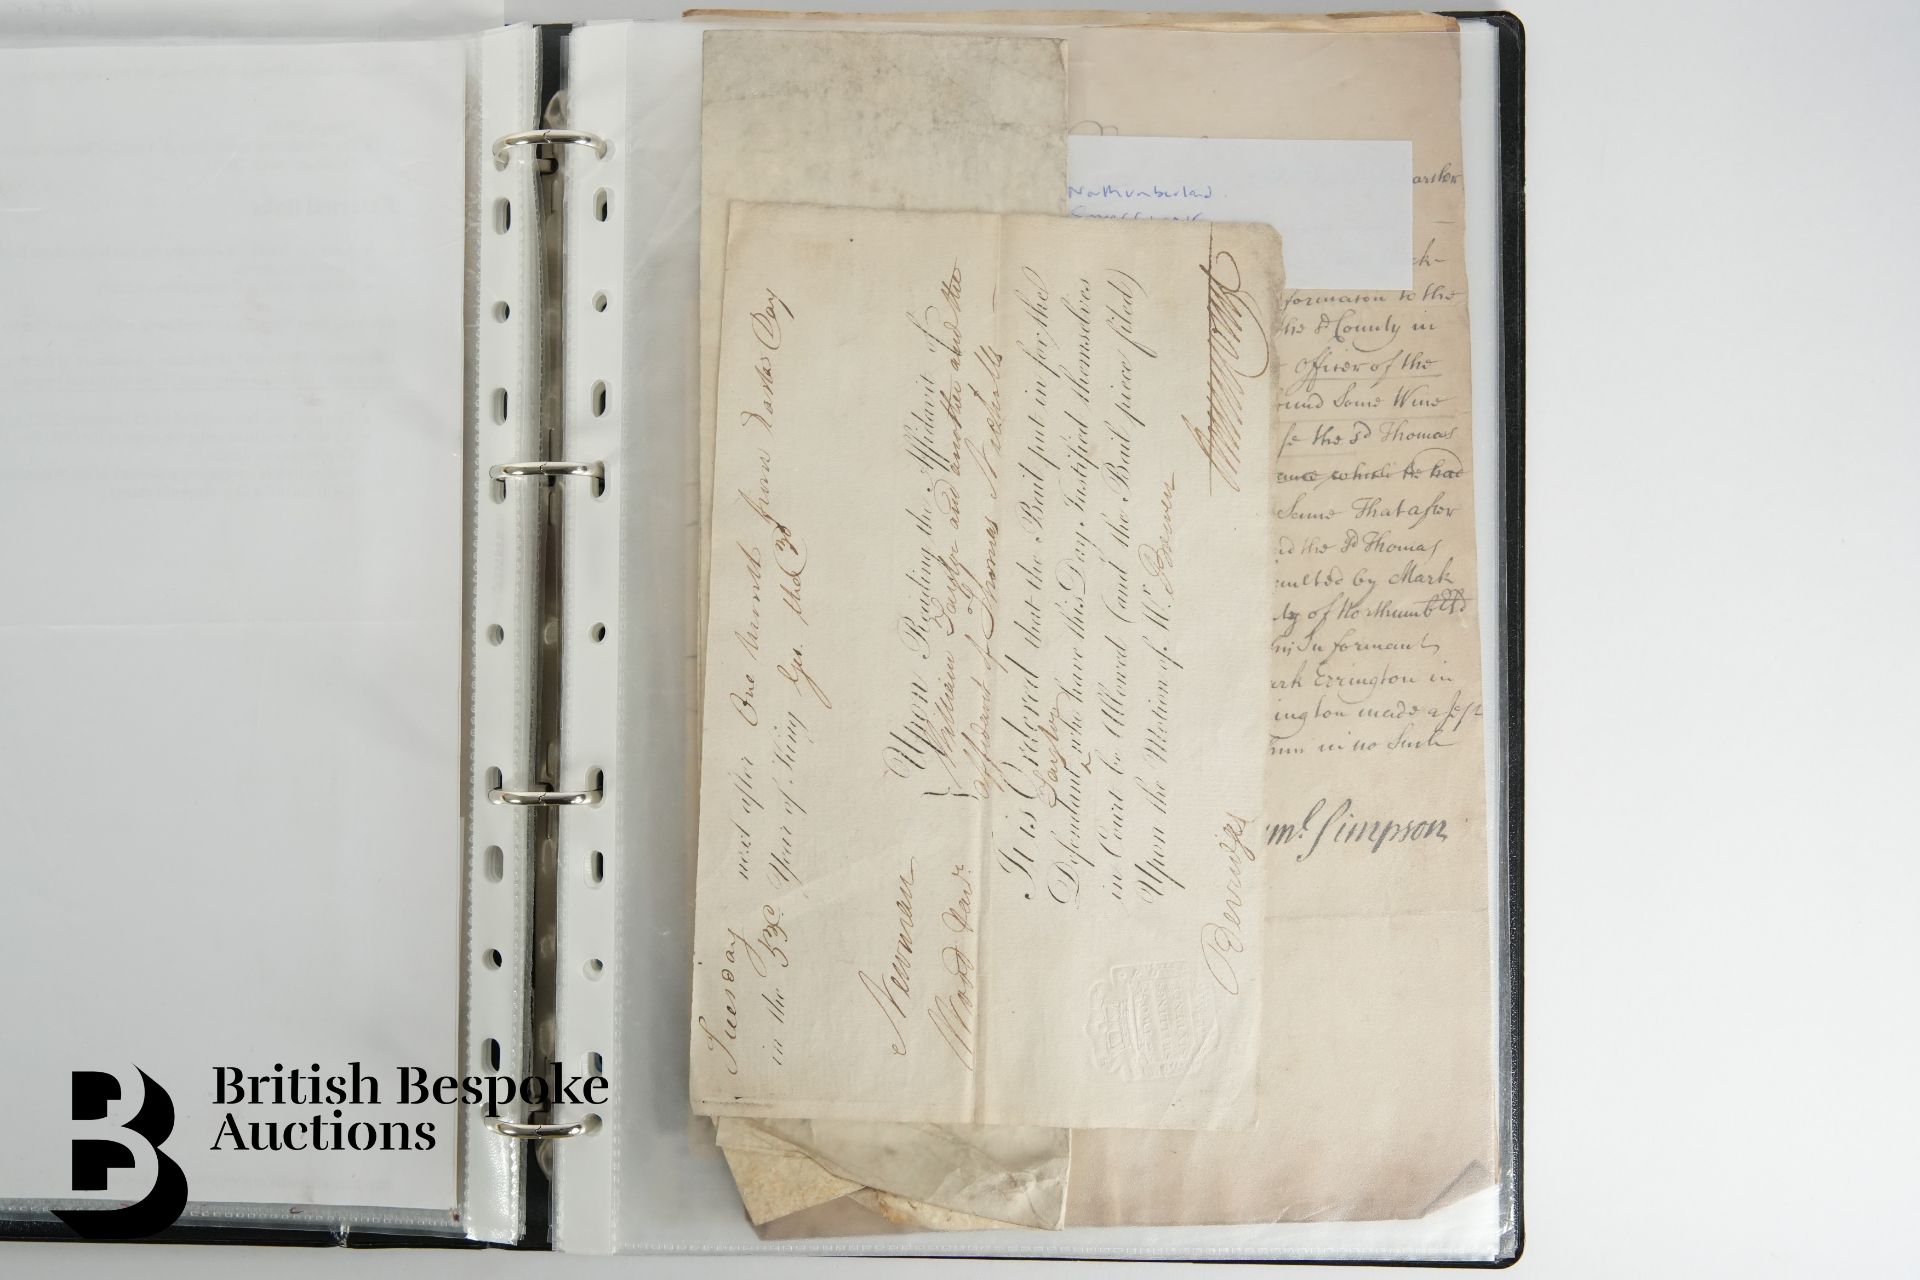 Black Ring Binder Containing 18th and 19th Century Letters or Documents - Image 5 of 16